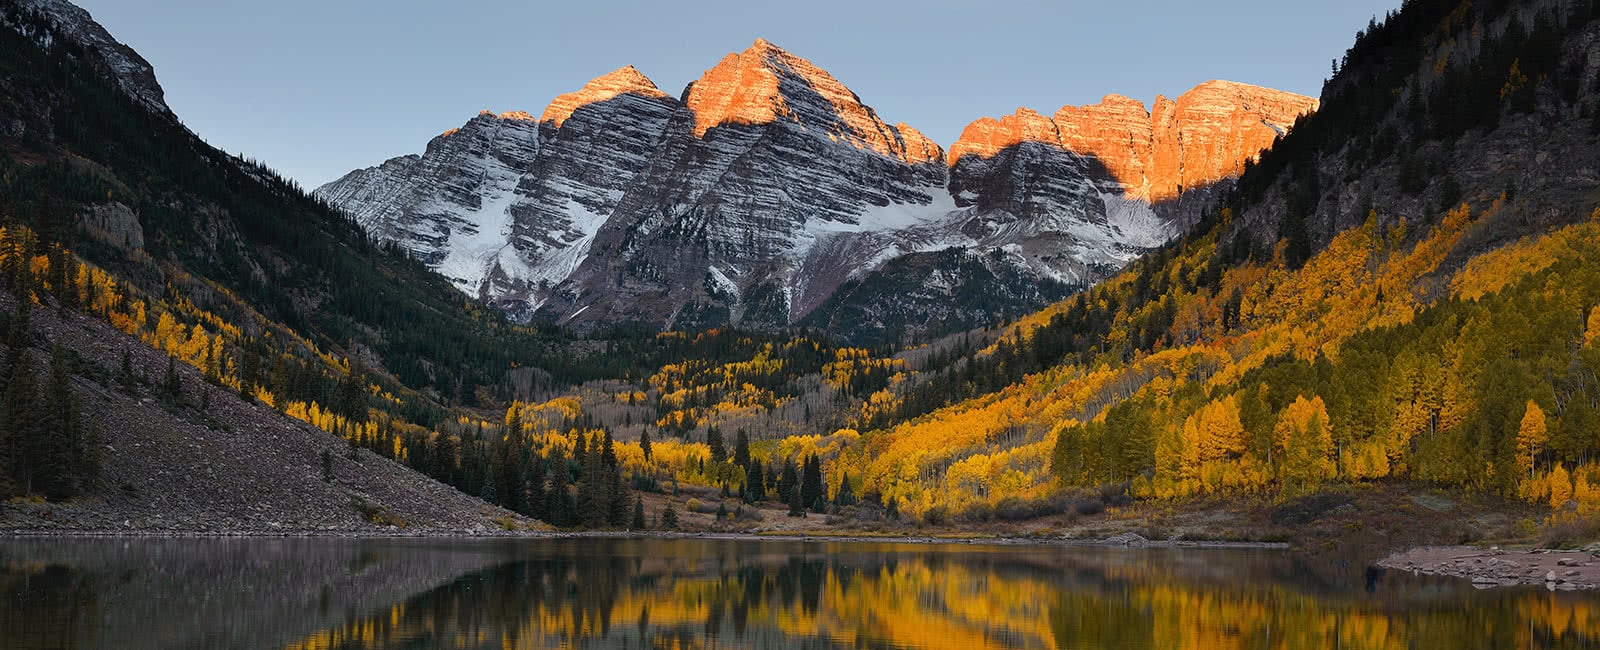 Enjoy a mountain vacation in Colorado with Hilton Grand Vacations